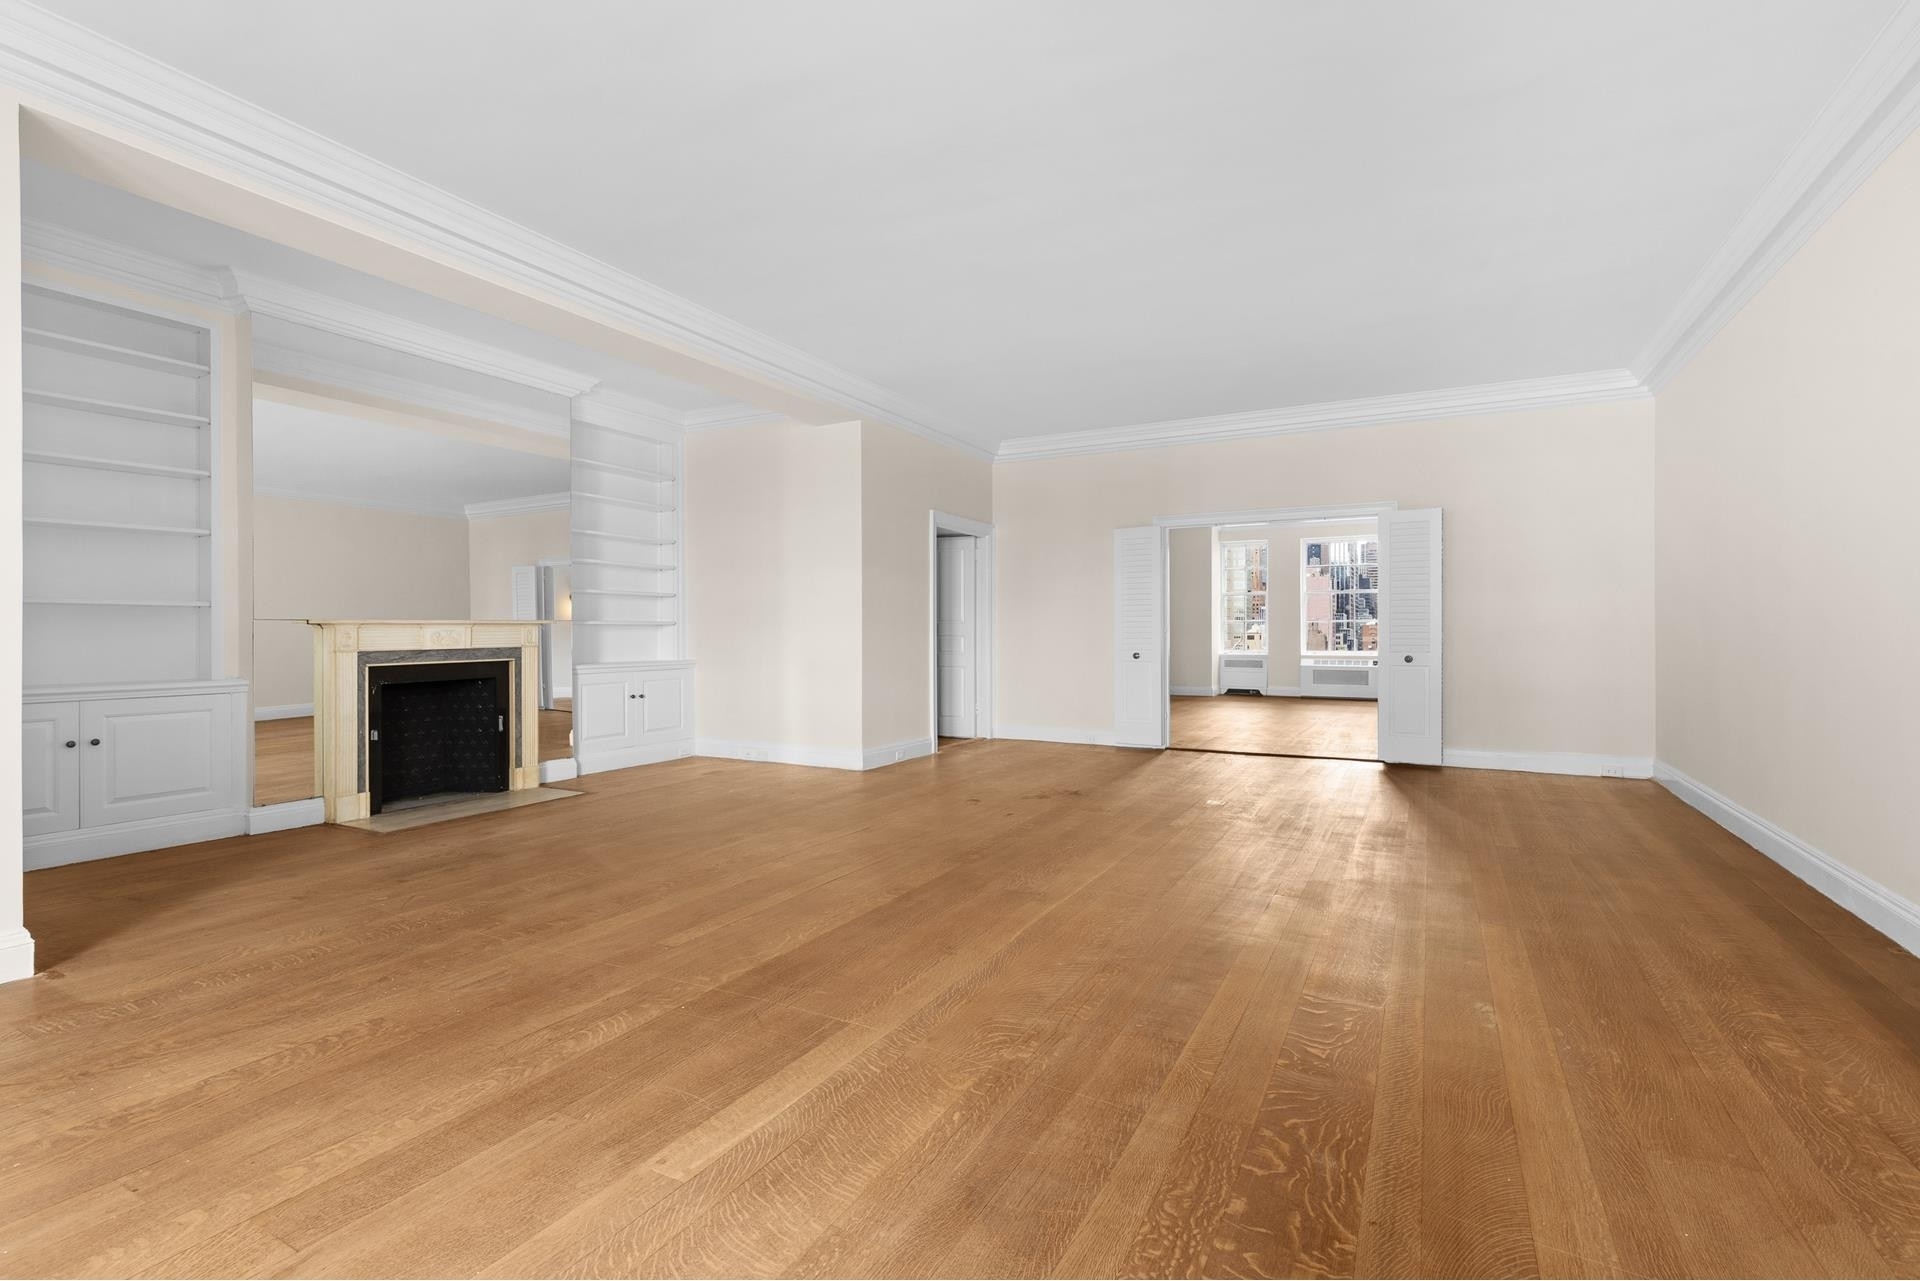 4. Co-op Properties for Sale at RIVER HOUSE, 435 E 52ND ST, 13B Beekman, New York, New York 10022